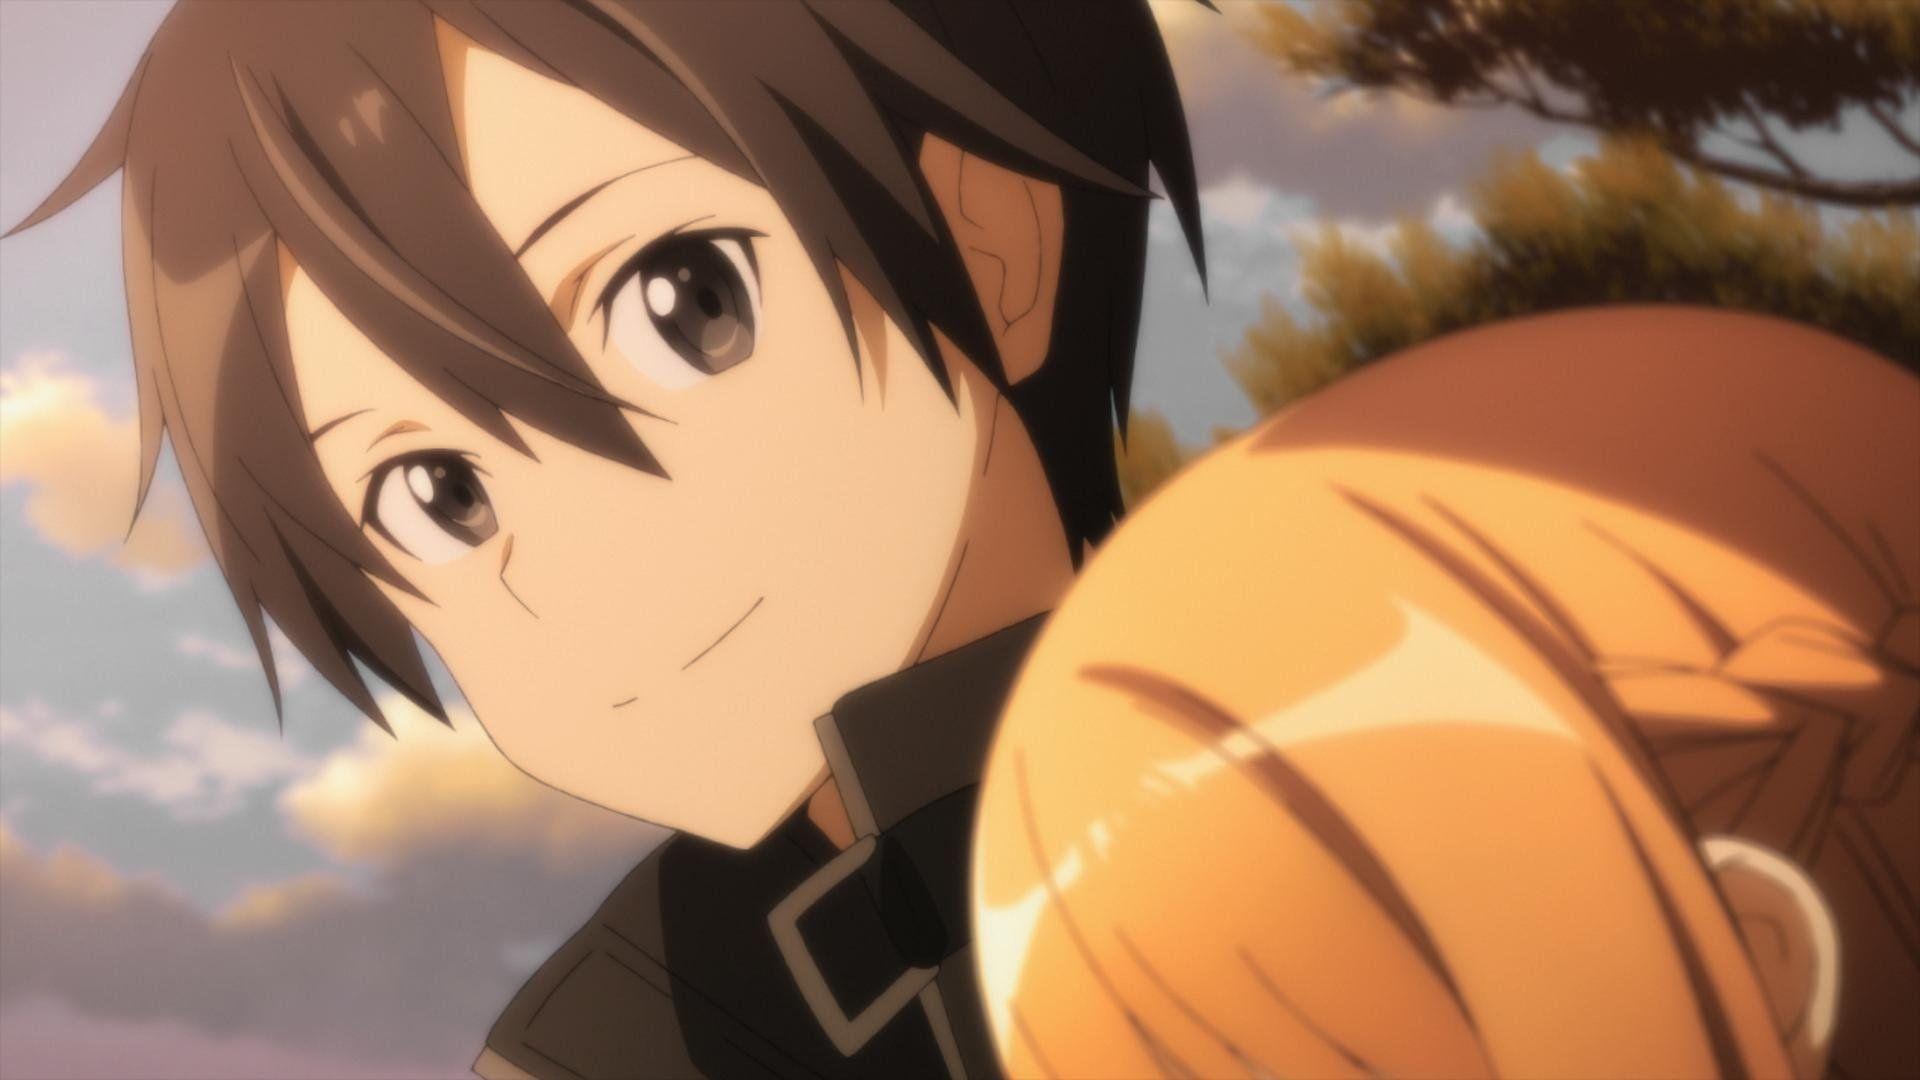 Everything You Need To Know About 'Sword Art Online'